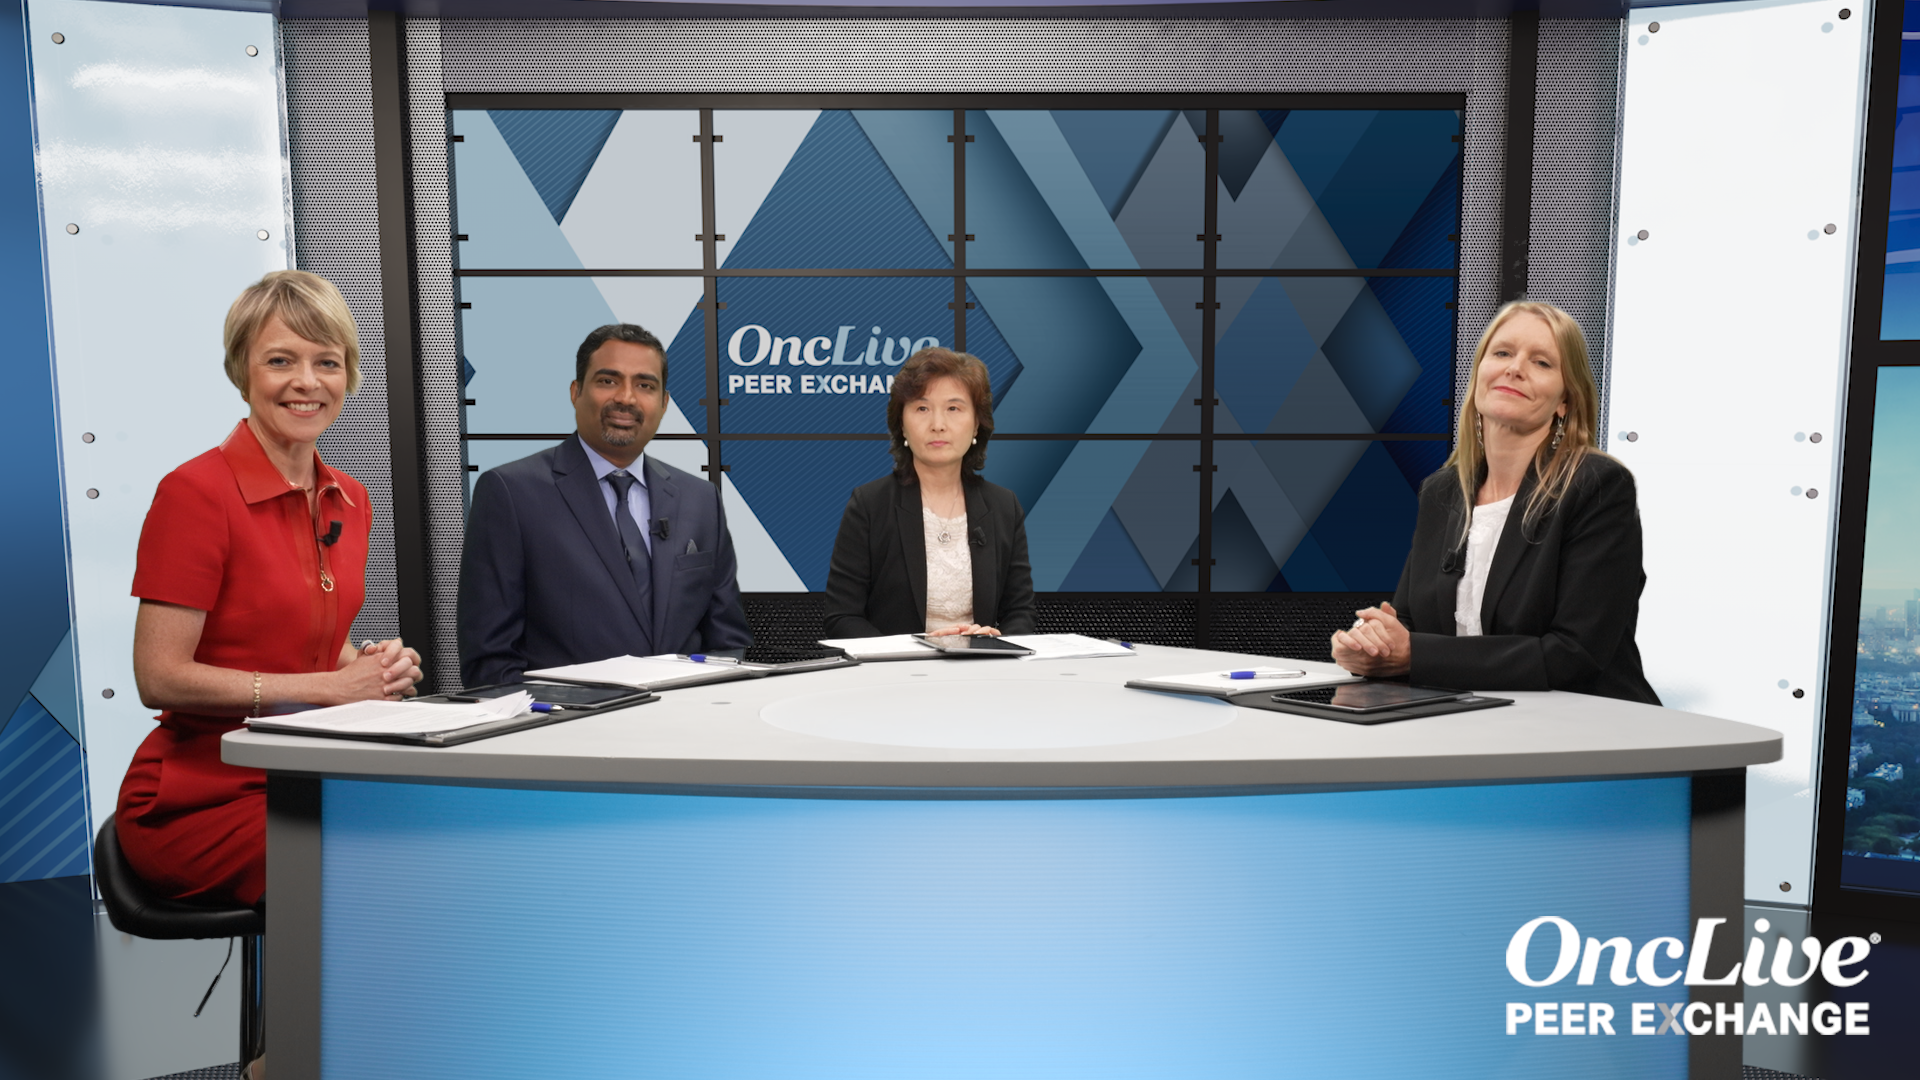 The Role of Anti-TGIT Immunotherapies in the Treatment of Advanced NSCLC